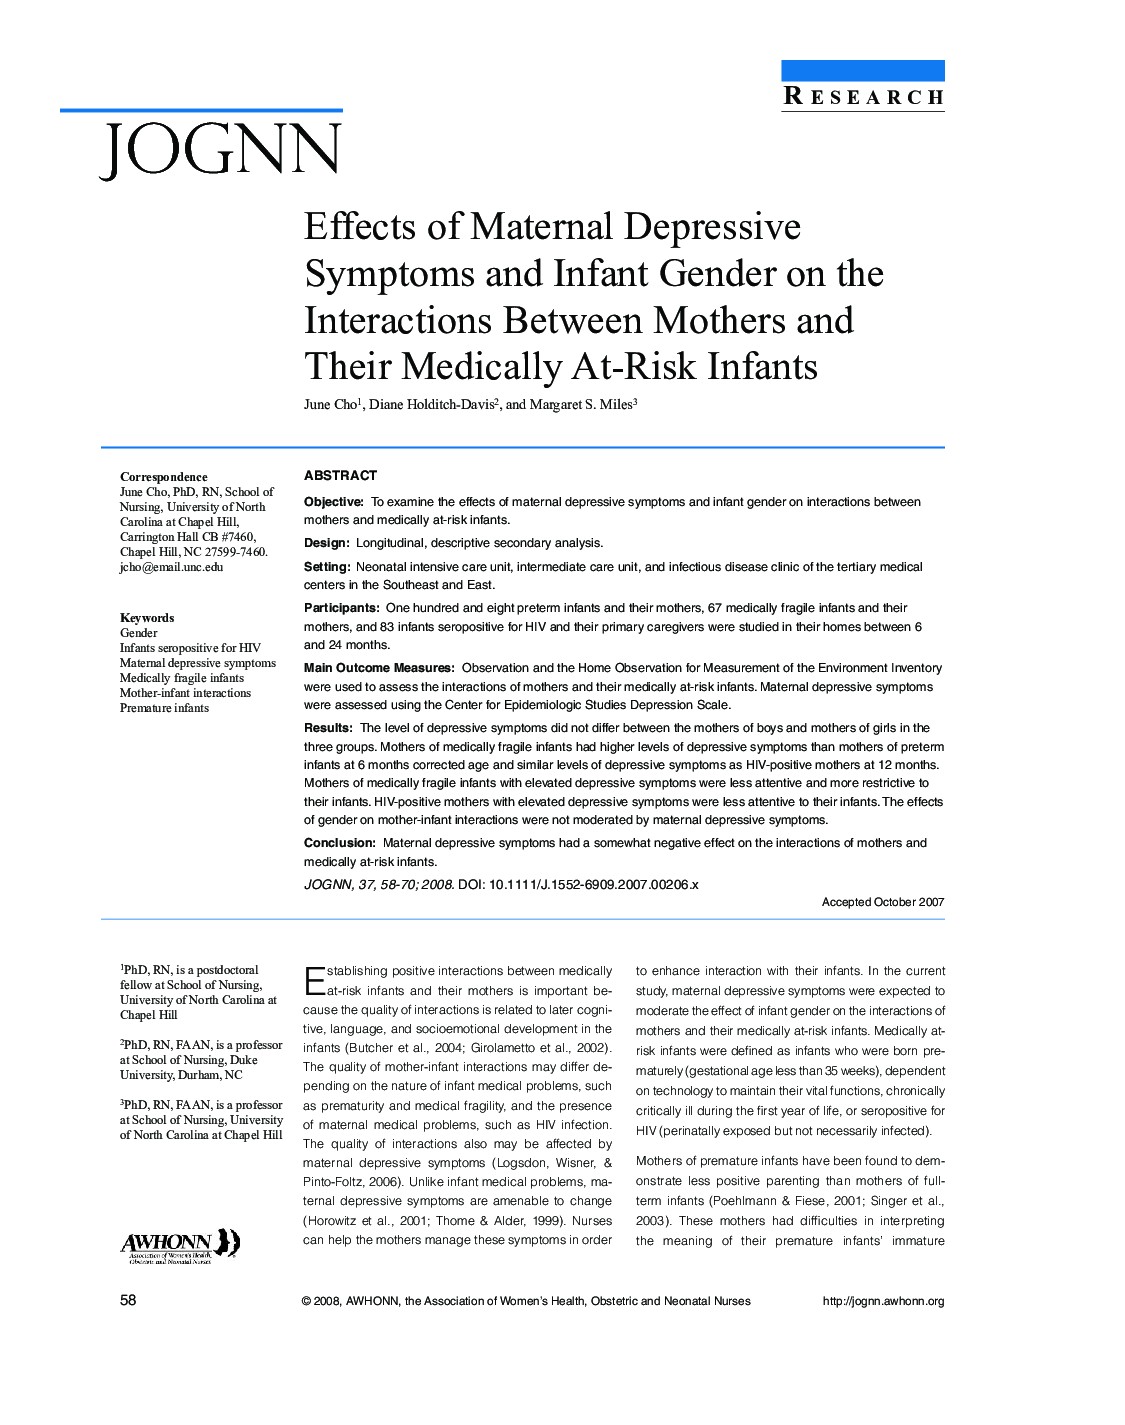 Effects of Maternal Depressive Symptoms and Infant Gender on the Interactions Between Mothers and Their Medically At-Risk Infants